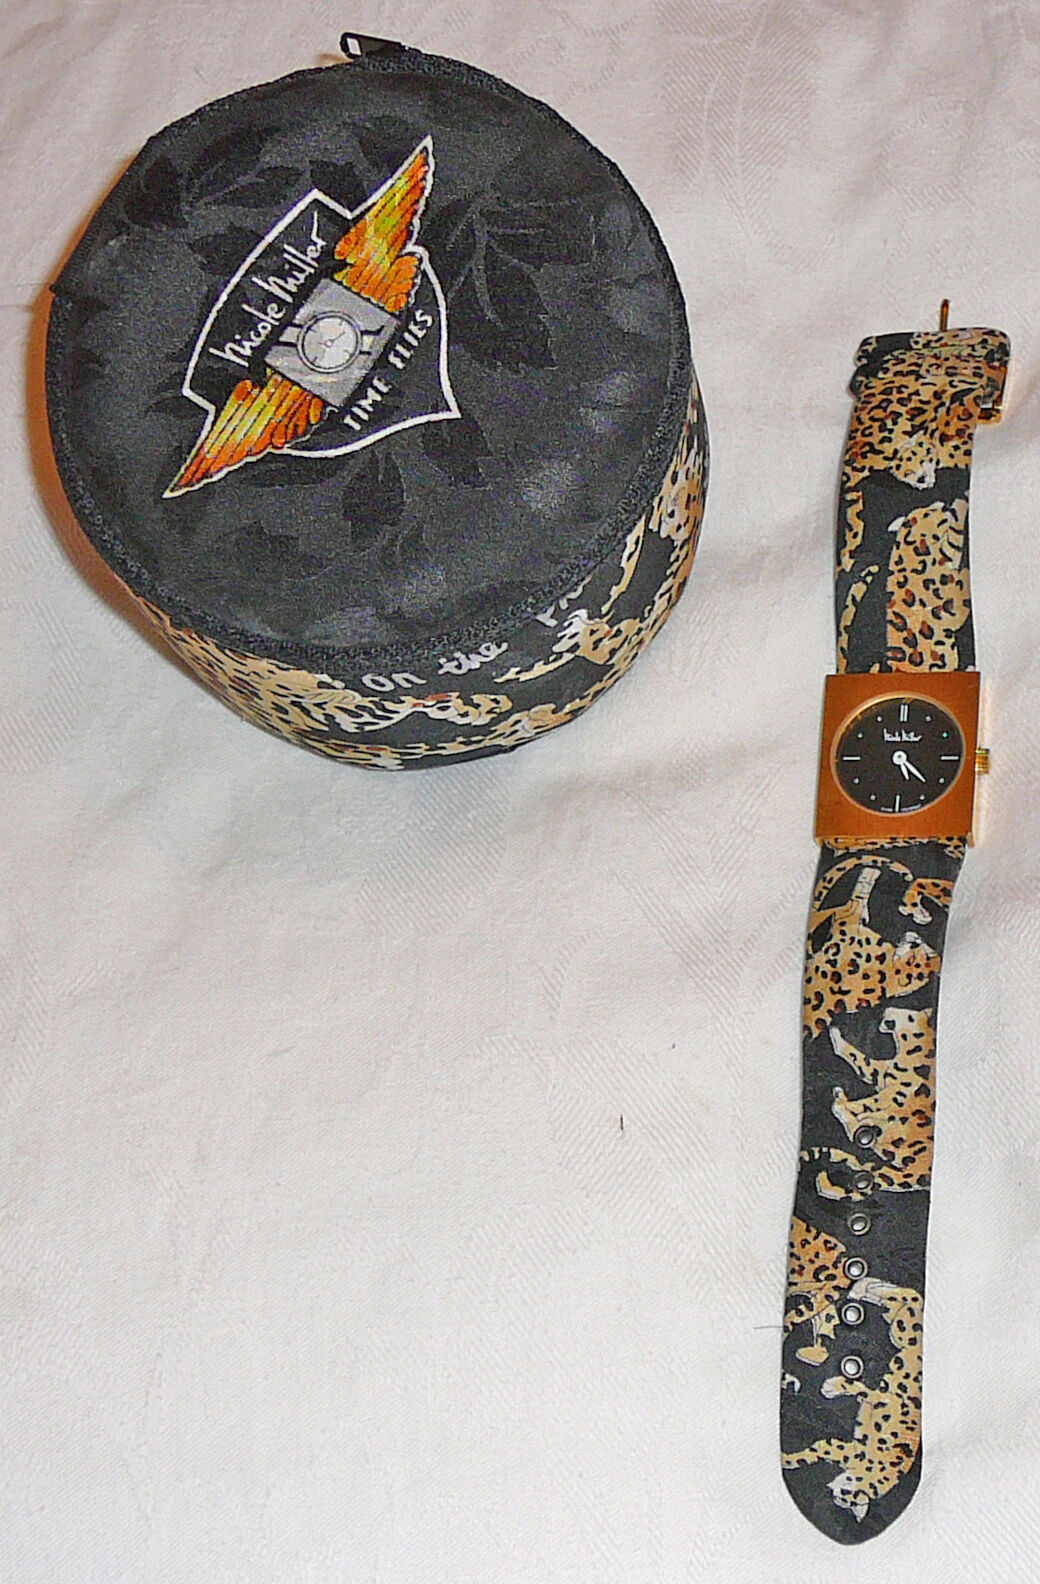 Nicole Miller TIME FLIES edition watch with fabric padded drum case, circa 1980s